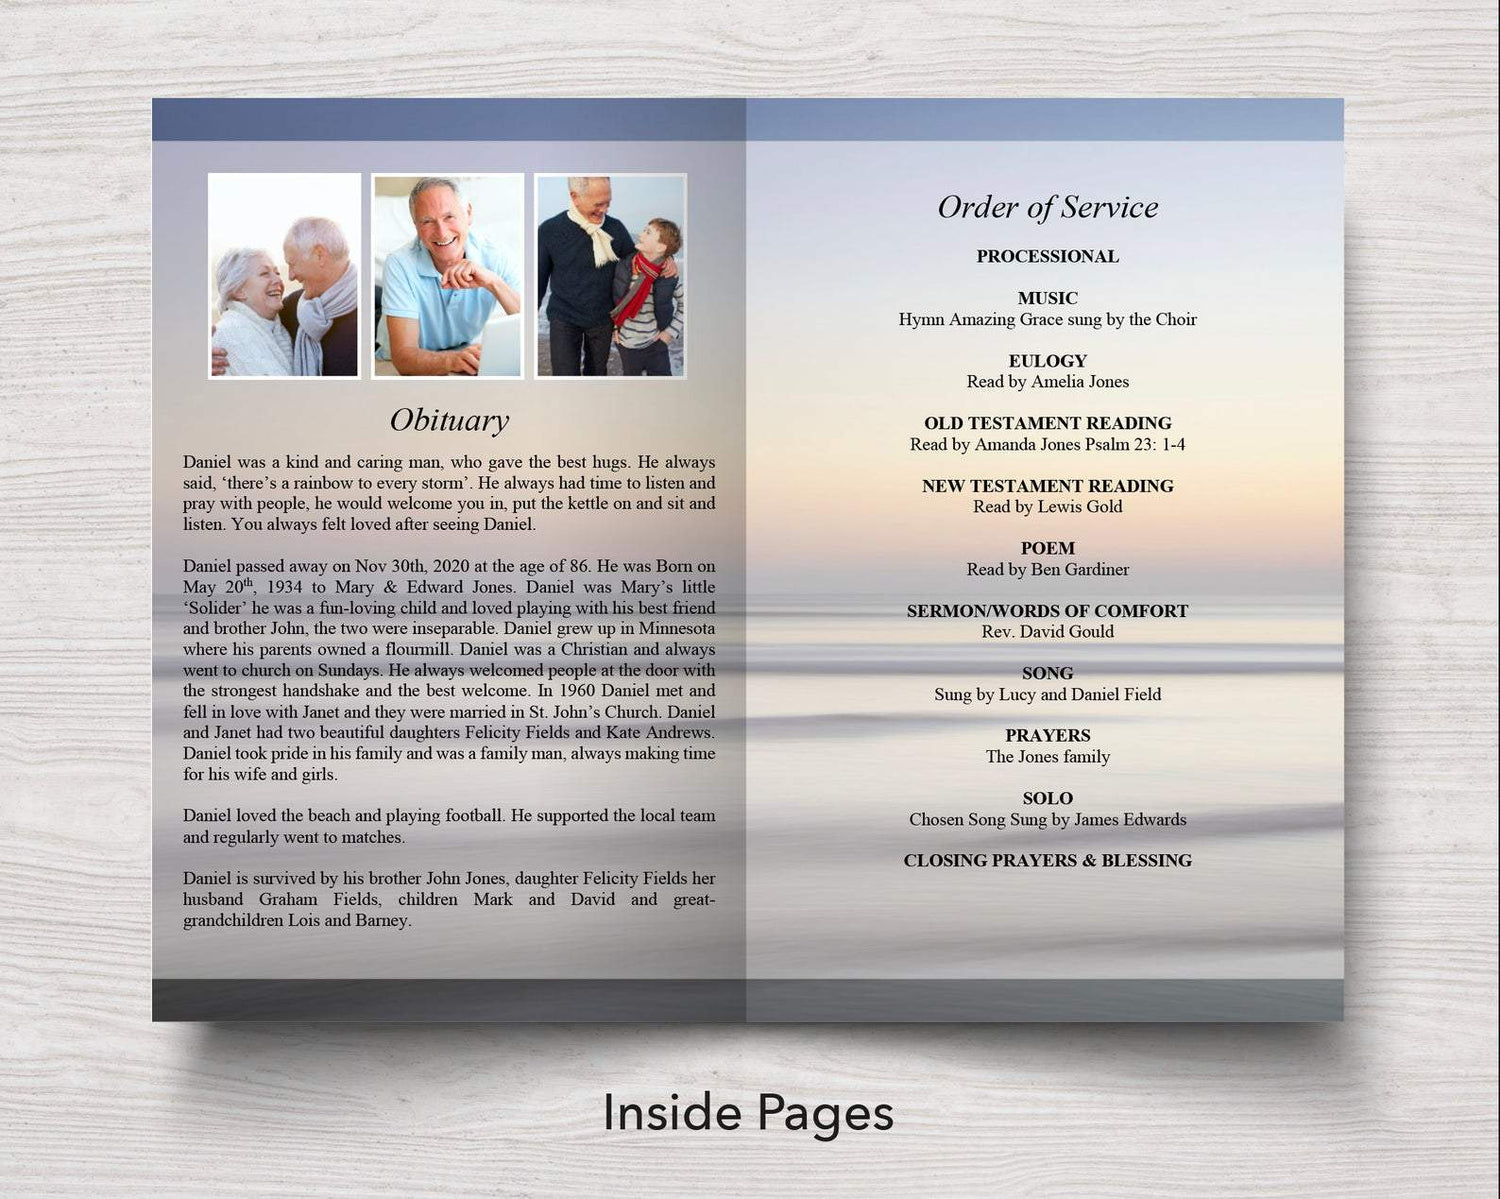 4 Page Beach Sunset Funeral Program Template